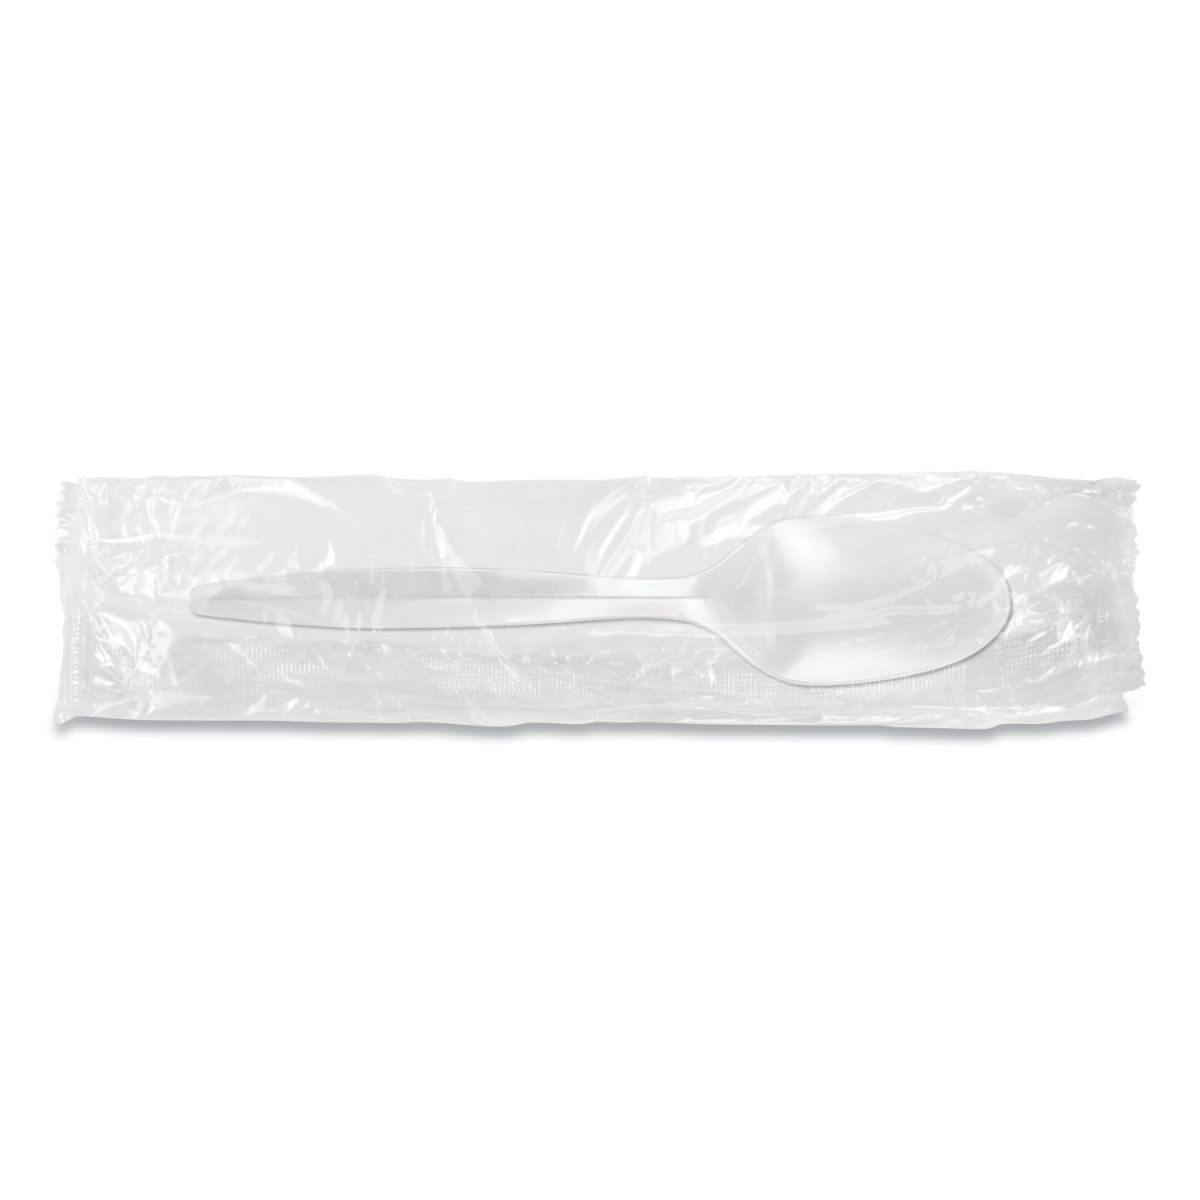 Picture of Berk Enterprises 1103000 Individually Wrapped Mediumweight Cutlery Spoon, White